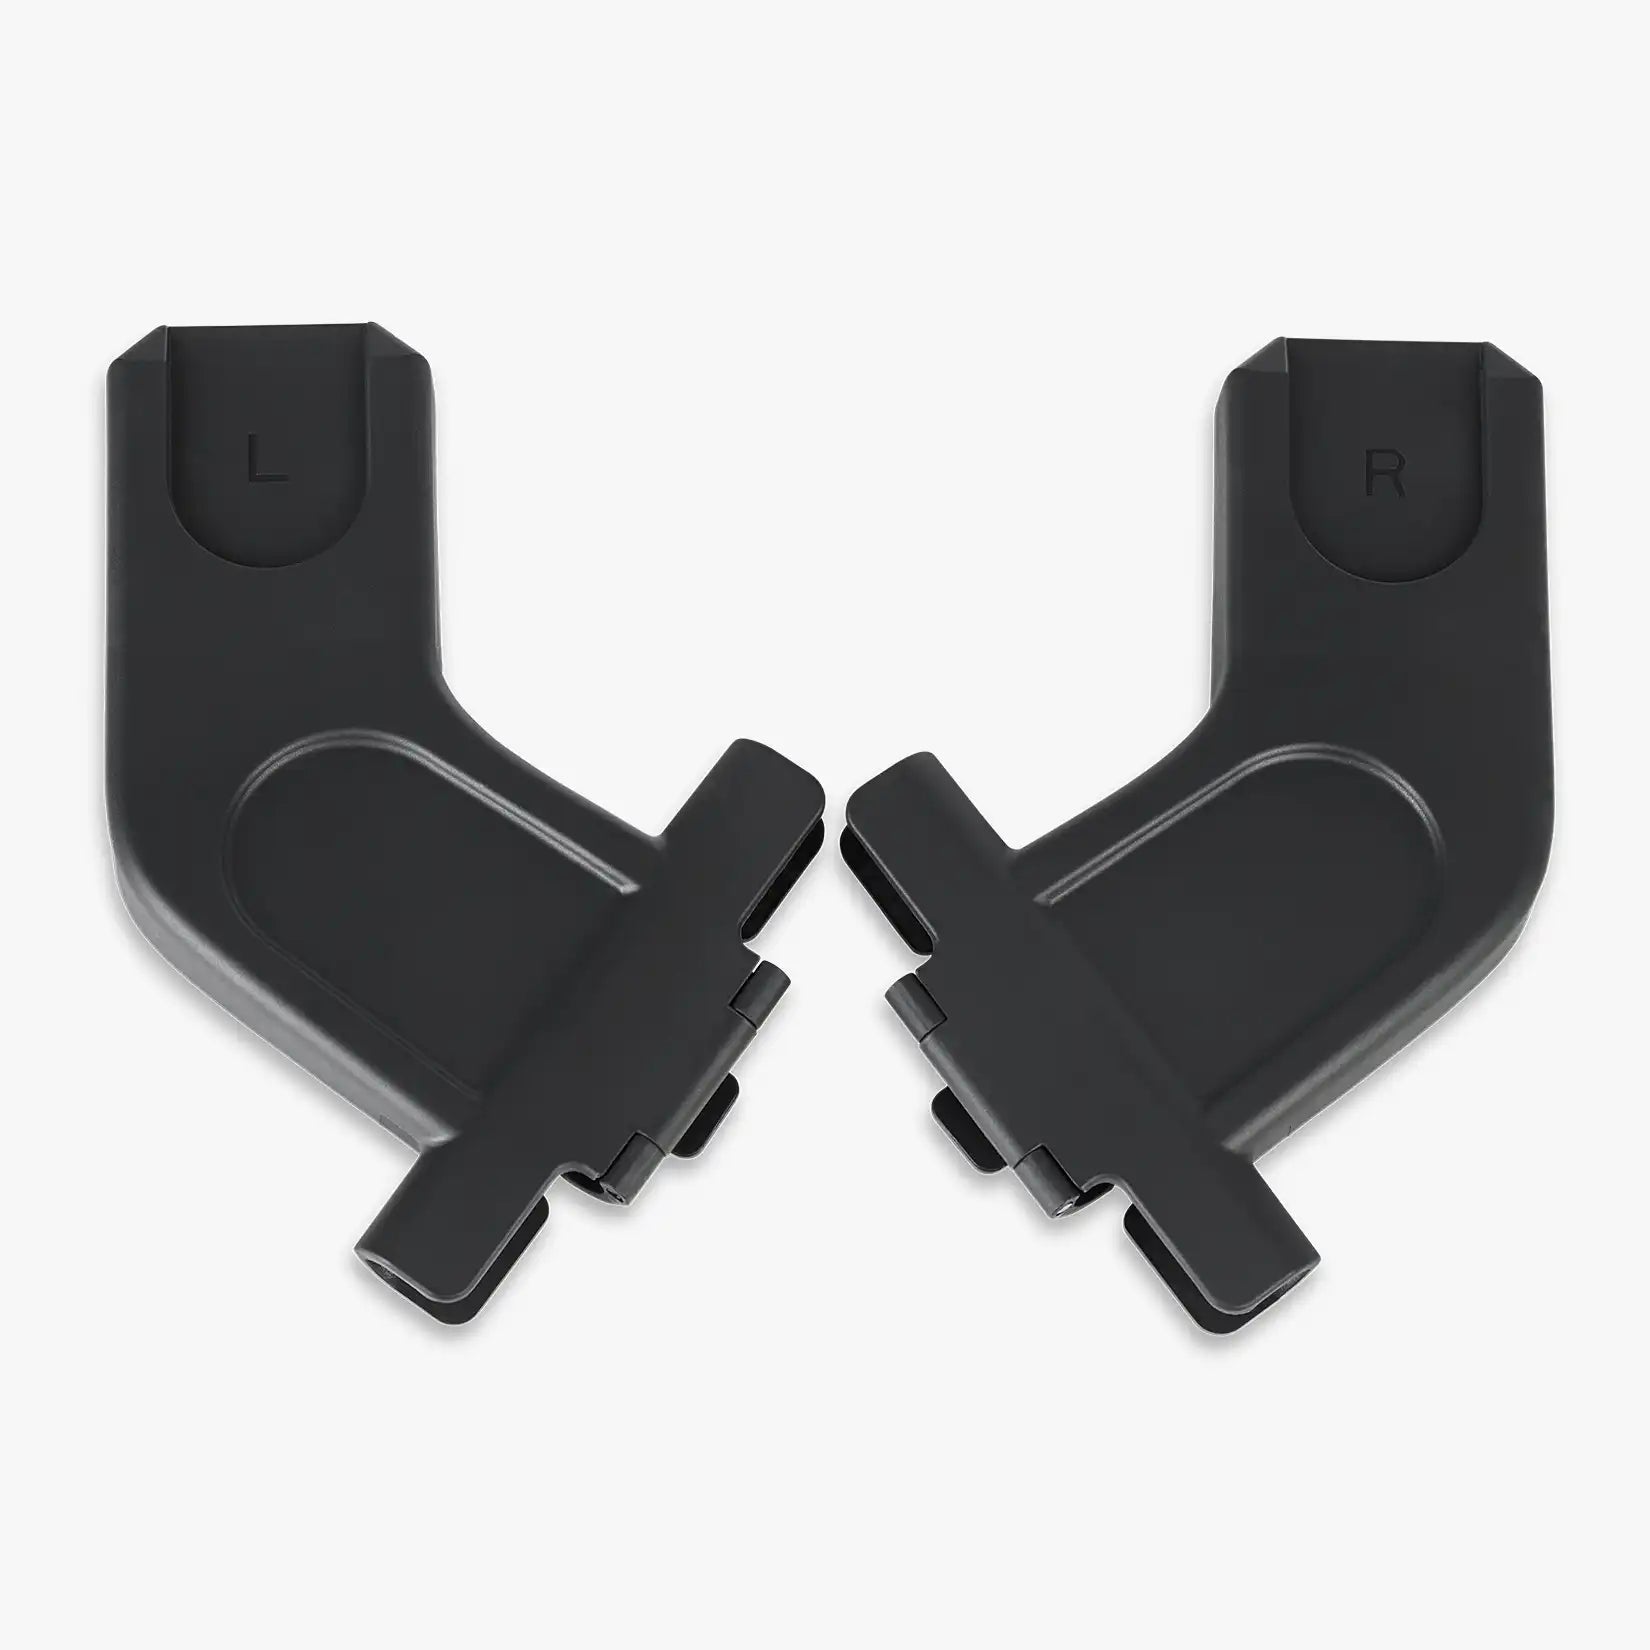 UPPAbaby Car Seat Adapters for MINU Stroller, Maxi-Cosi®, Nuna®, Cybex, and BeSafe® - ANB Baby -817609018899$20 - $50